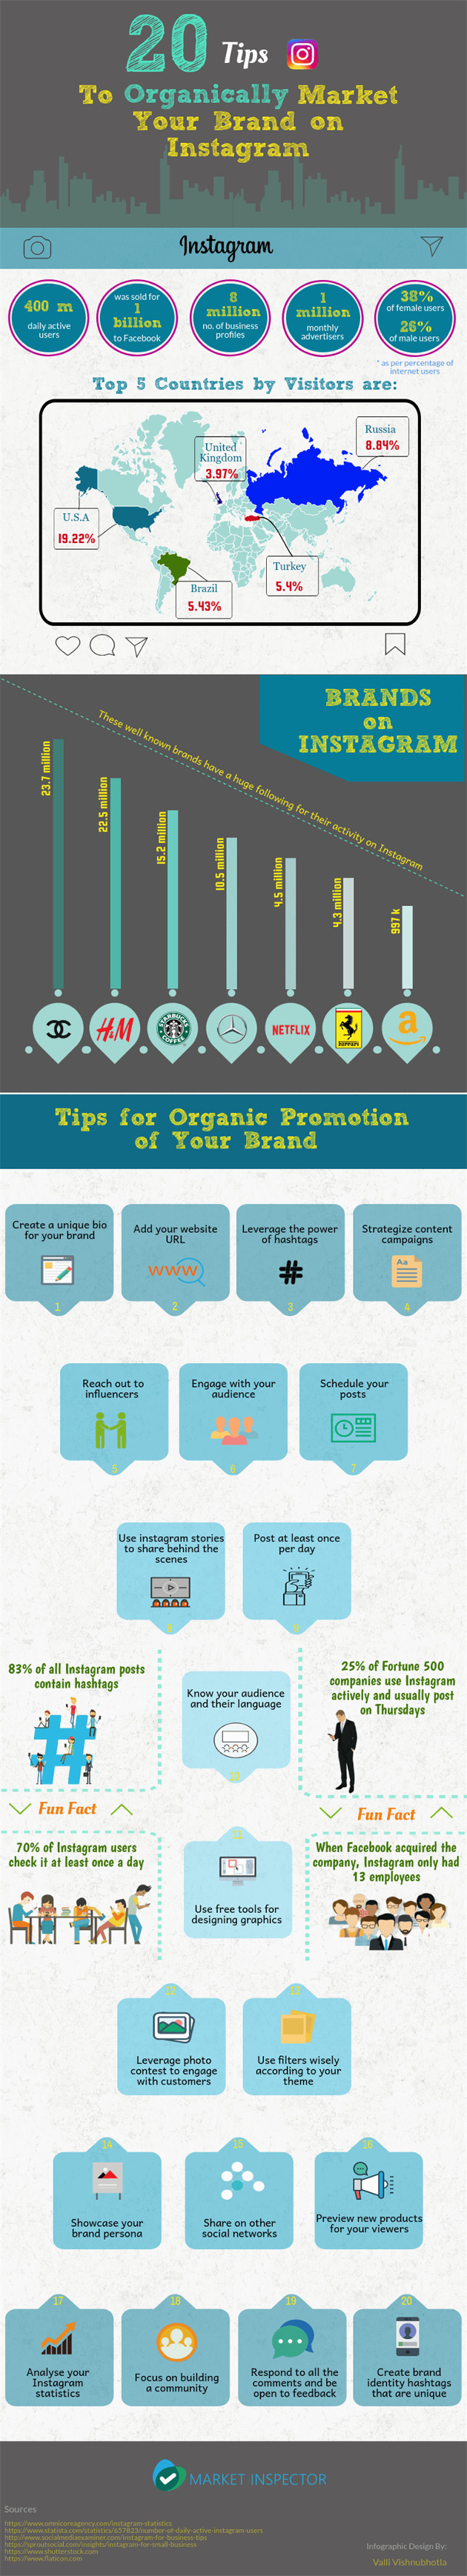 20 Tips to Organically Market Your Brand on Instagram 